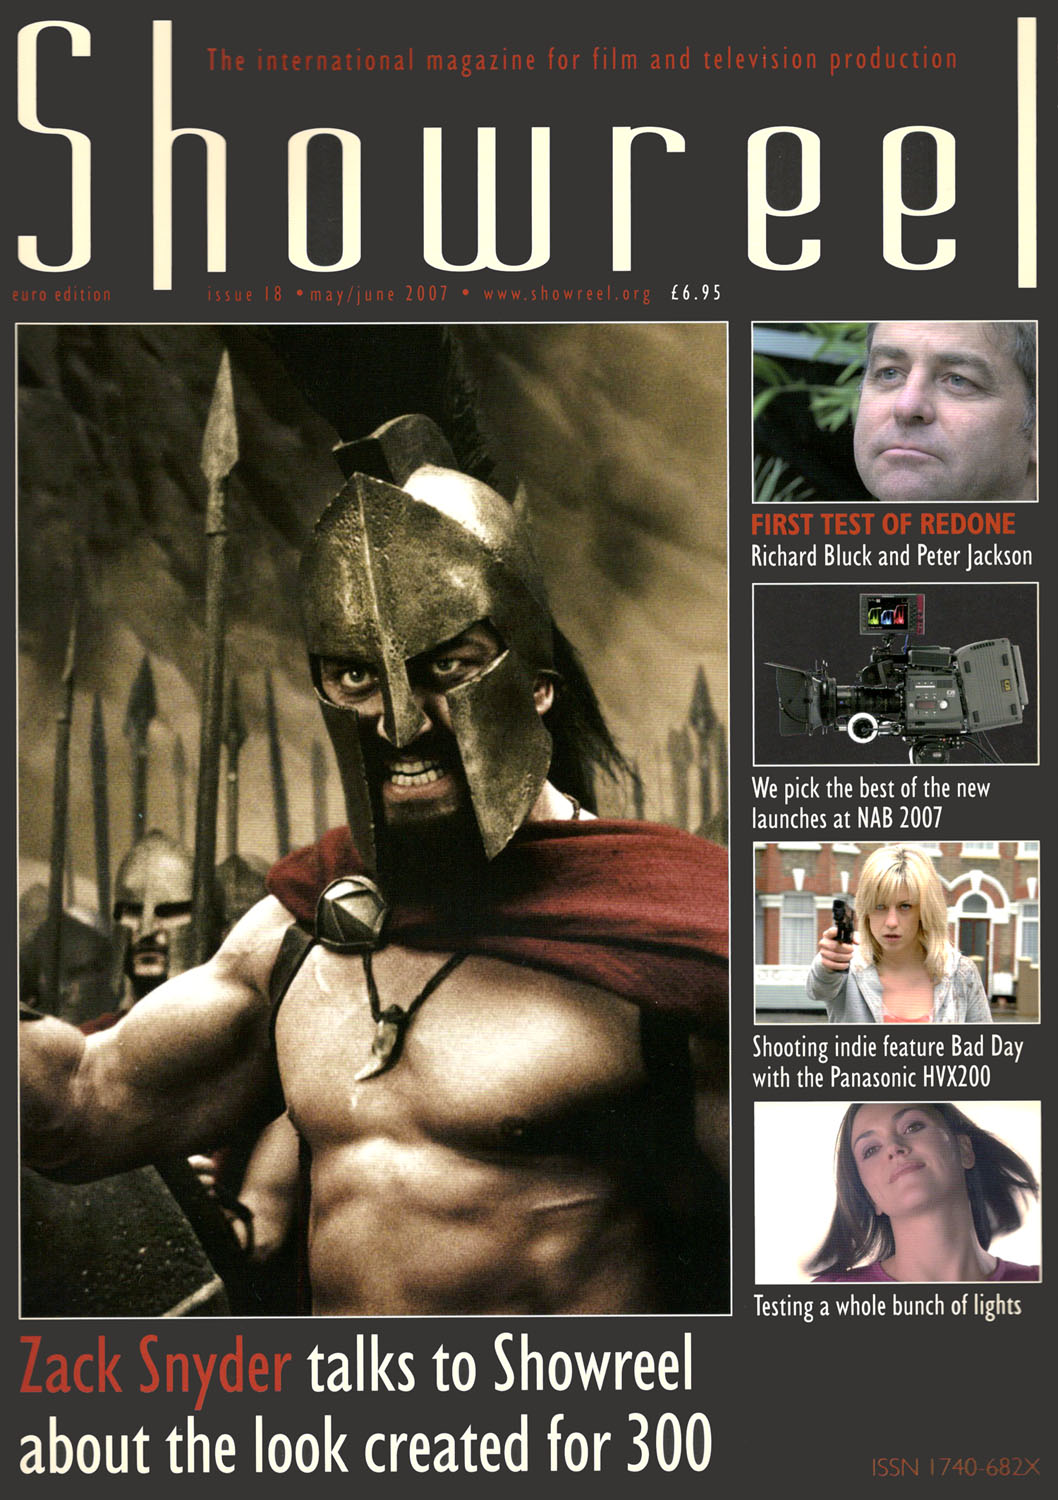 showreel_cover_issue-18_may-jun-2007_euro-edition_[zachsnyder]_crop_[smal]_1058x1500_72dpi_high.jpg